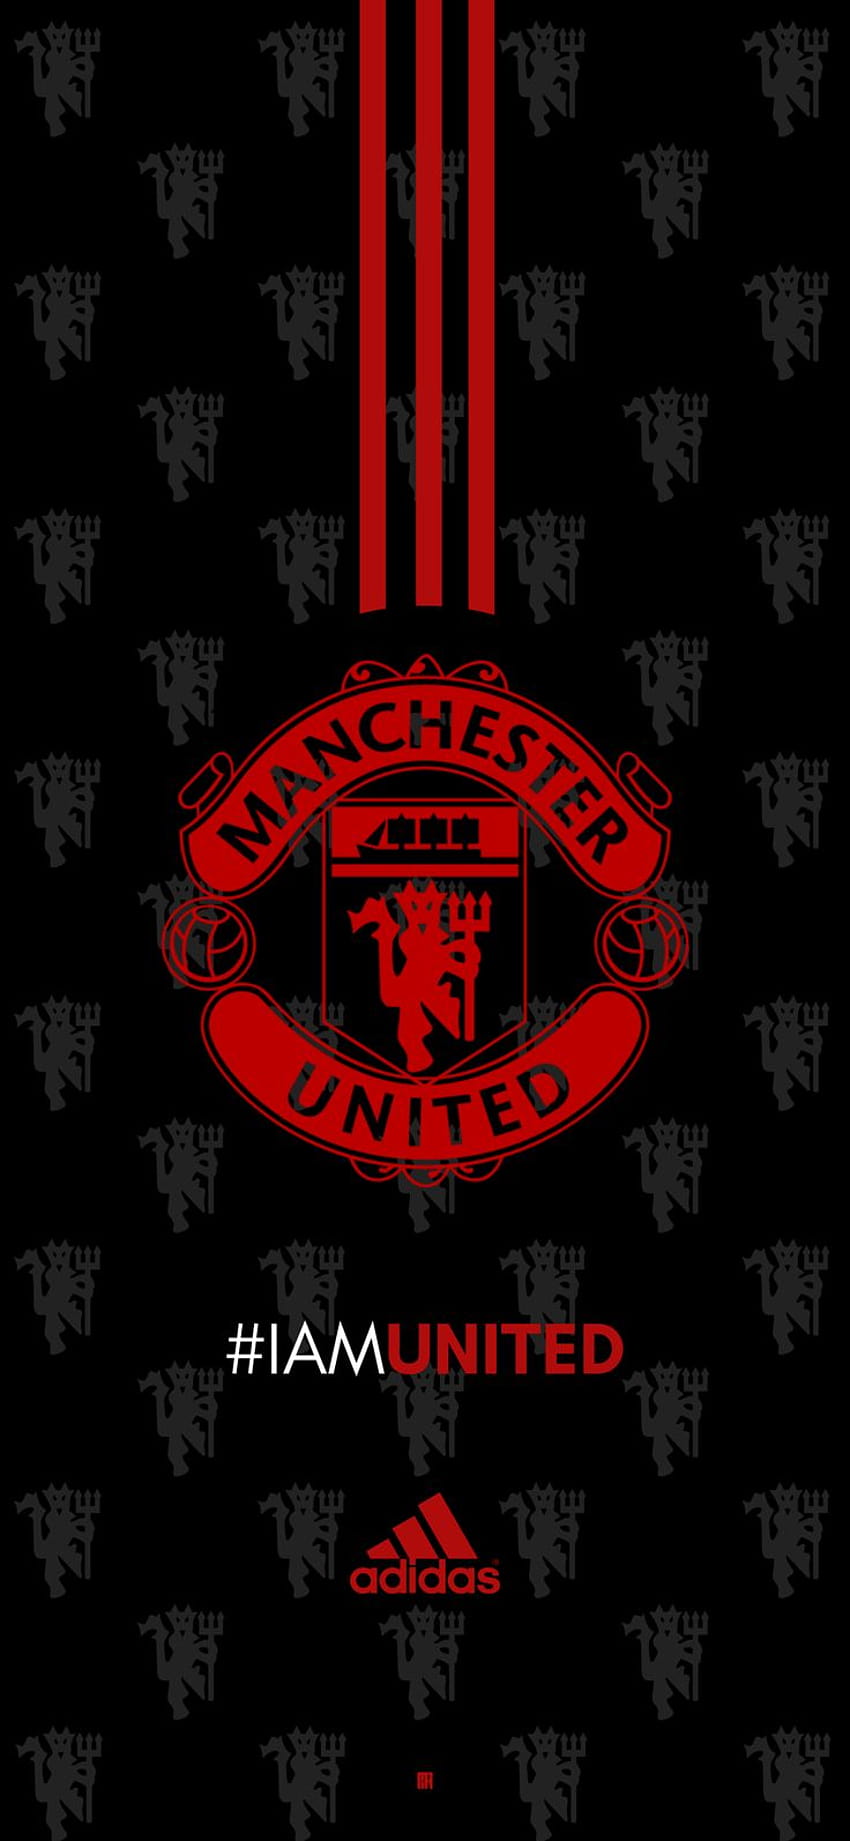 Man Utd for mobile phone, tablet, computer and other de… in 2021, manchester united women 2021 HD phone wallpaper